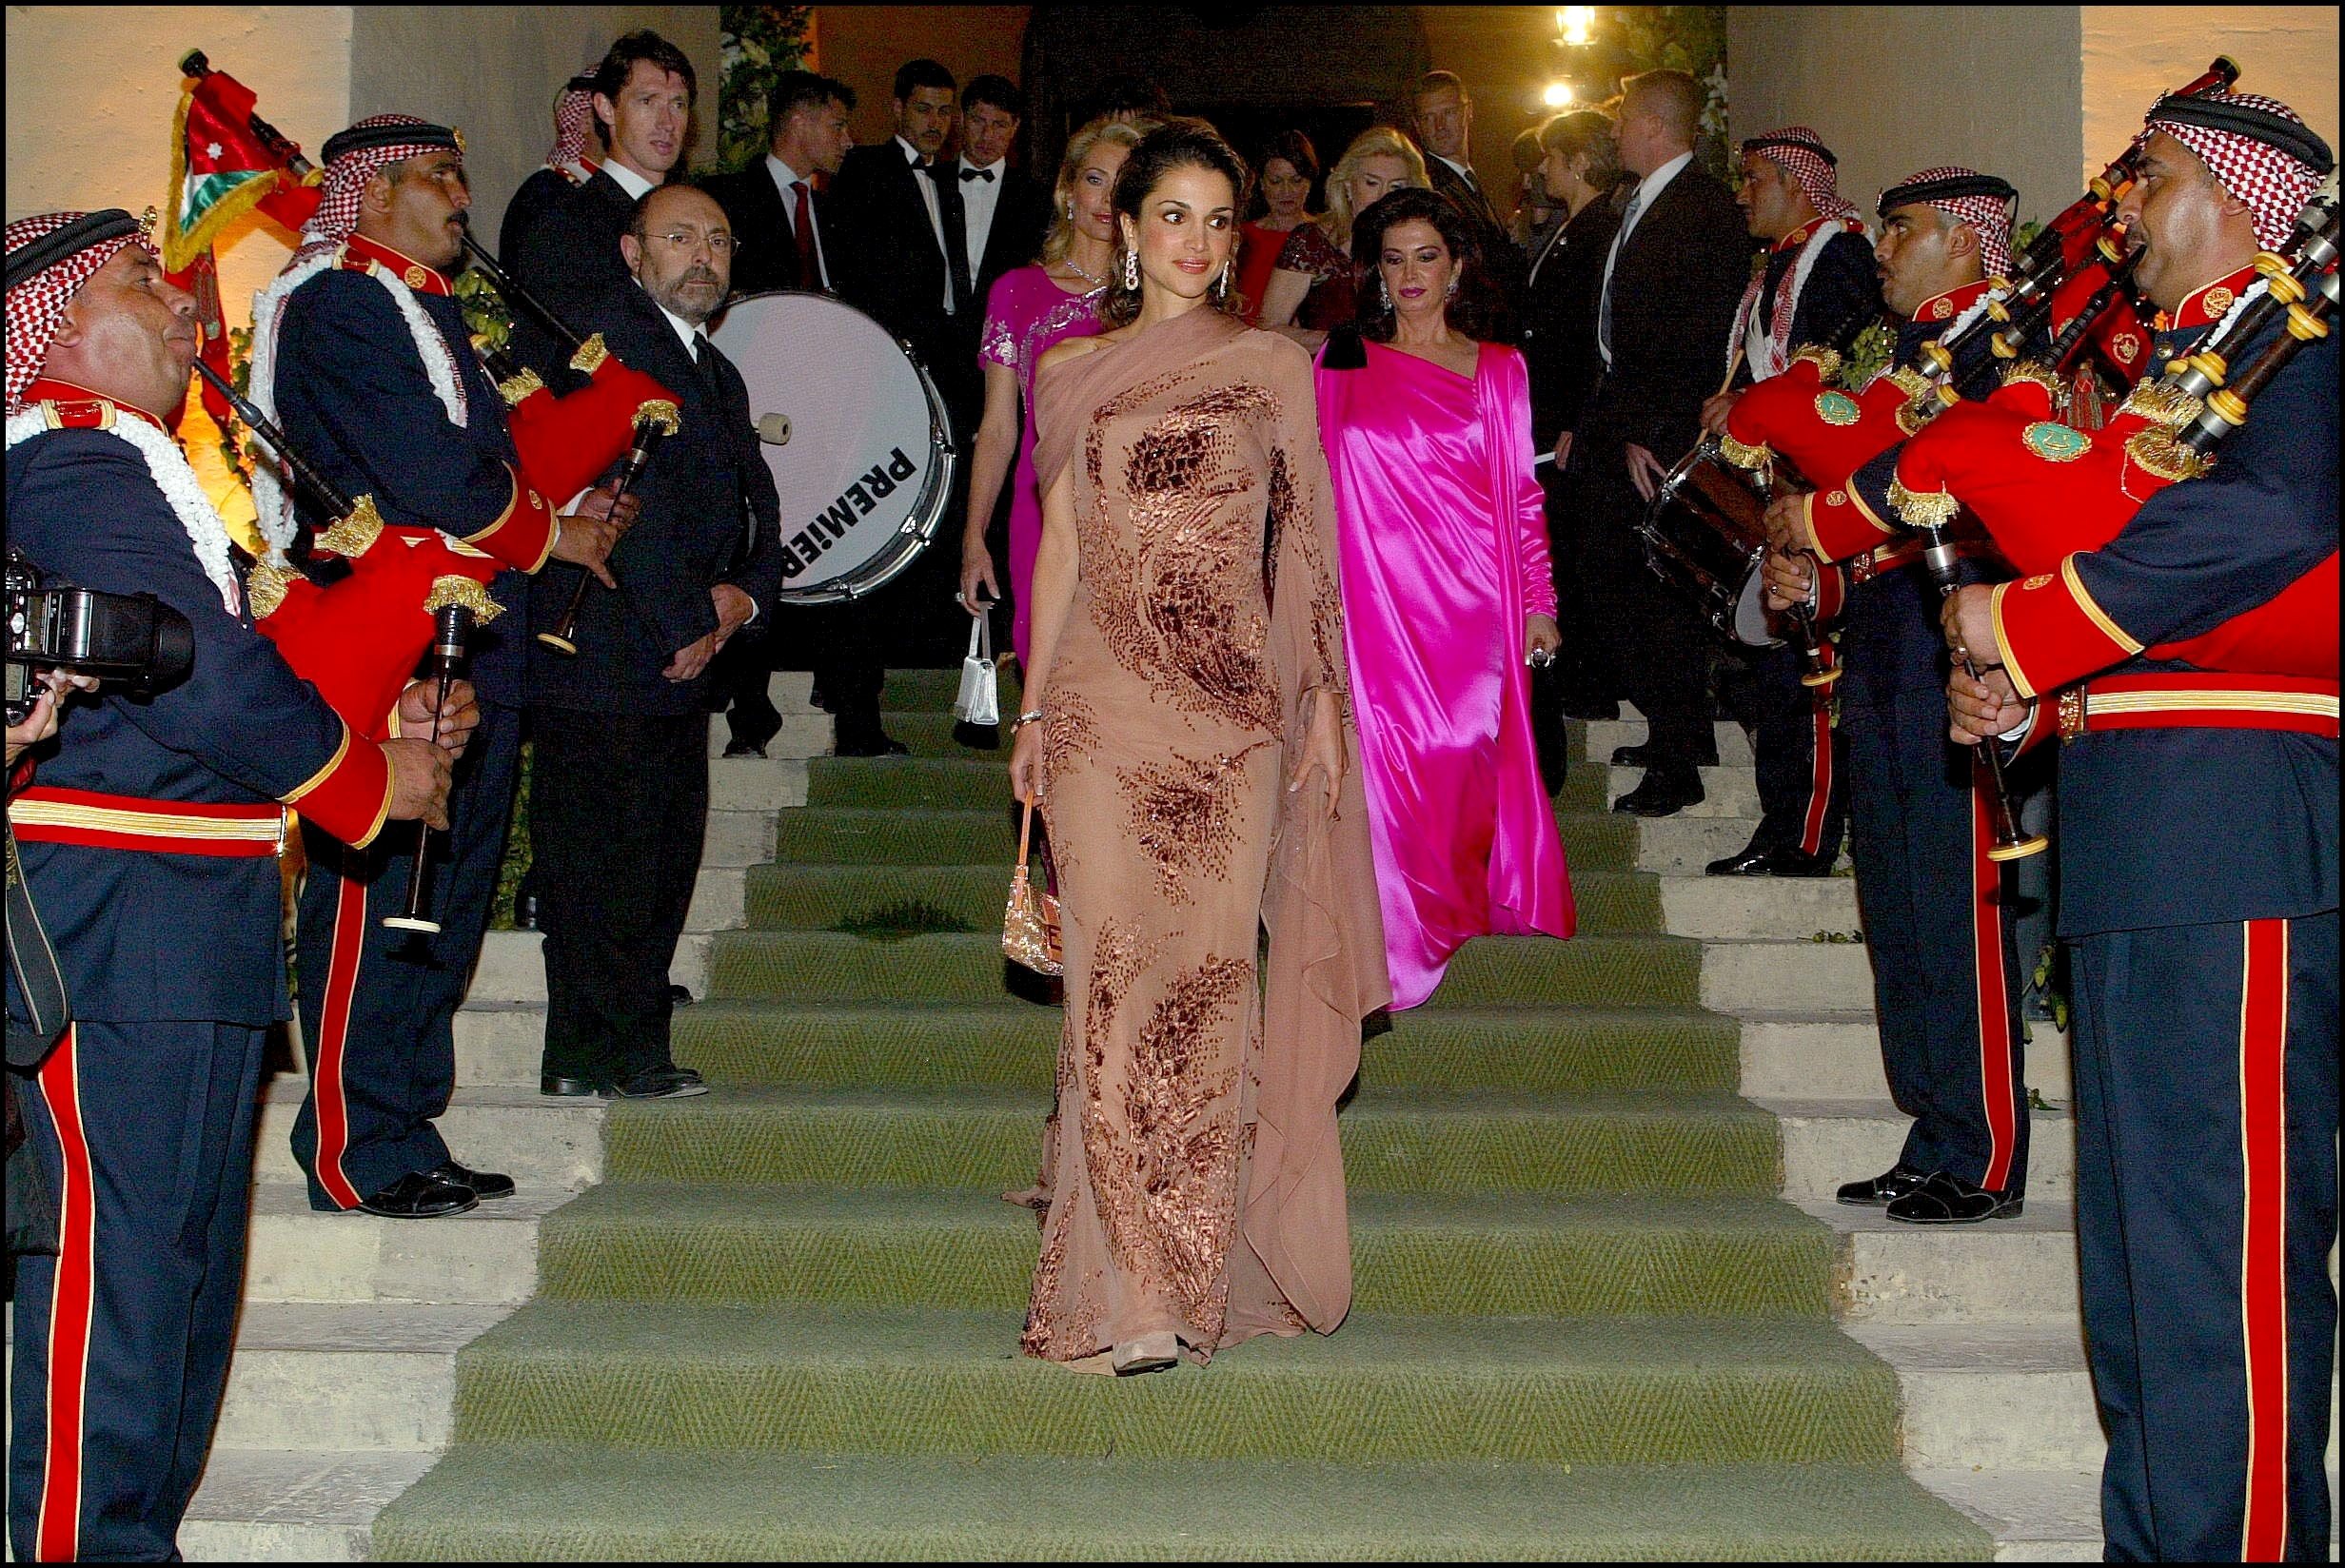 Queen Rania Attends In Chateau De Versailles In Benefit Of The Jordan River Foundation, in France on September 30, 2002.